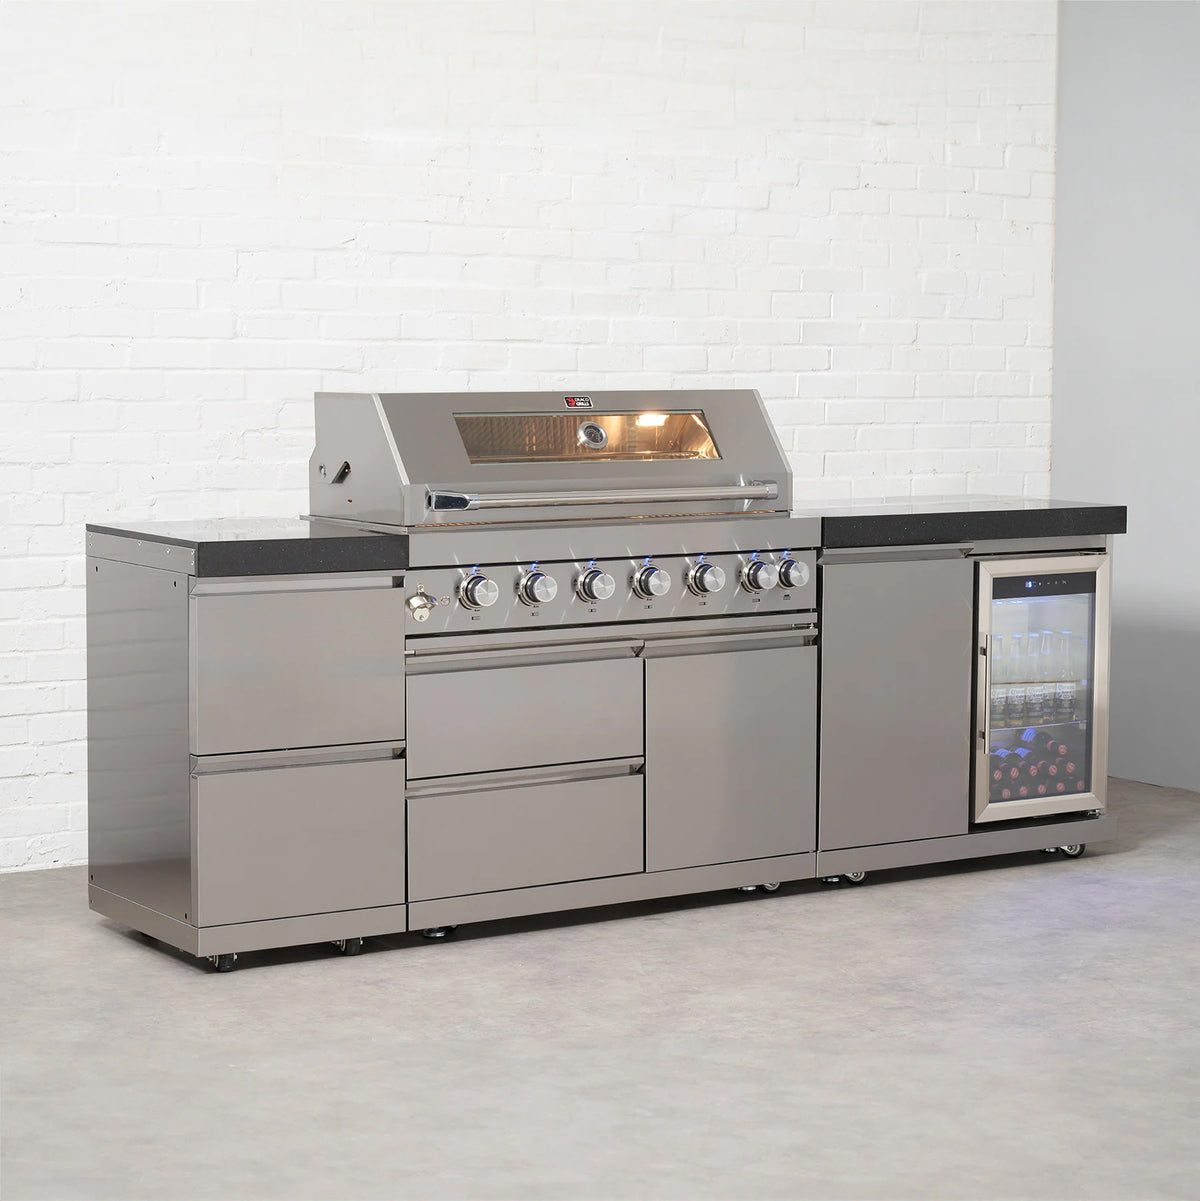 Draco Grills 6 Burner BBQ Modular Outdoor Kitchen with Double Drawers and Single Fridge Unit